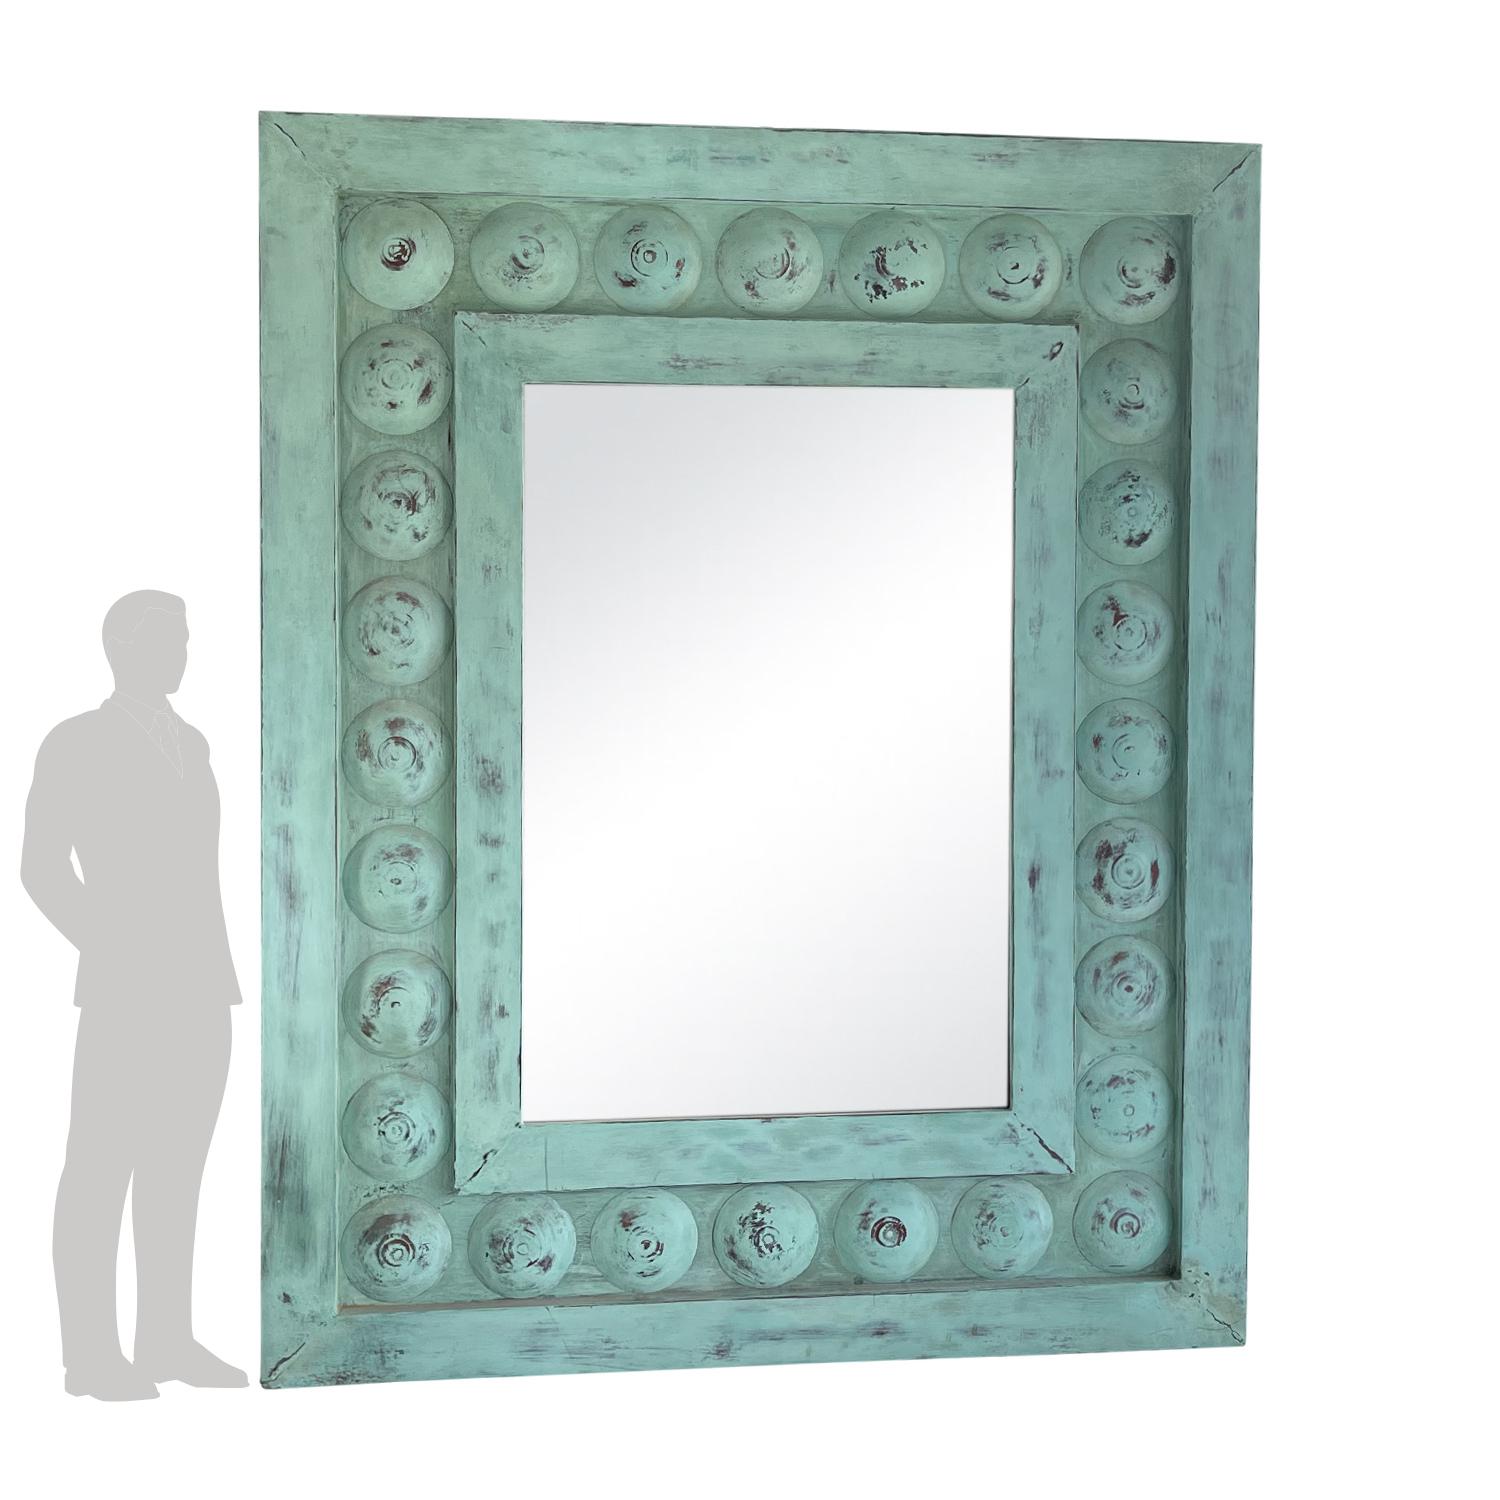 An oversized large copper mirror with a wide frame, vert de gris finish and newly inserted mirror glass. The front of the mirror is original and mounted on a refurbished back. Wear consistent with age and use, circa early 20th century, Prov. Ile De